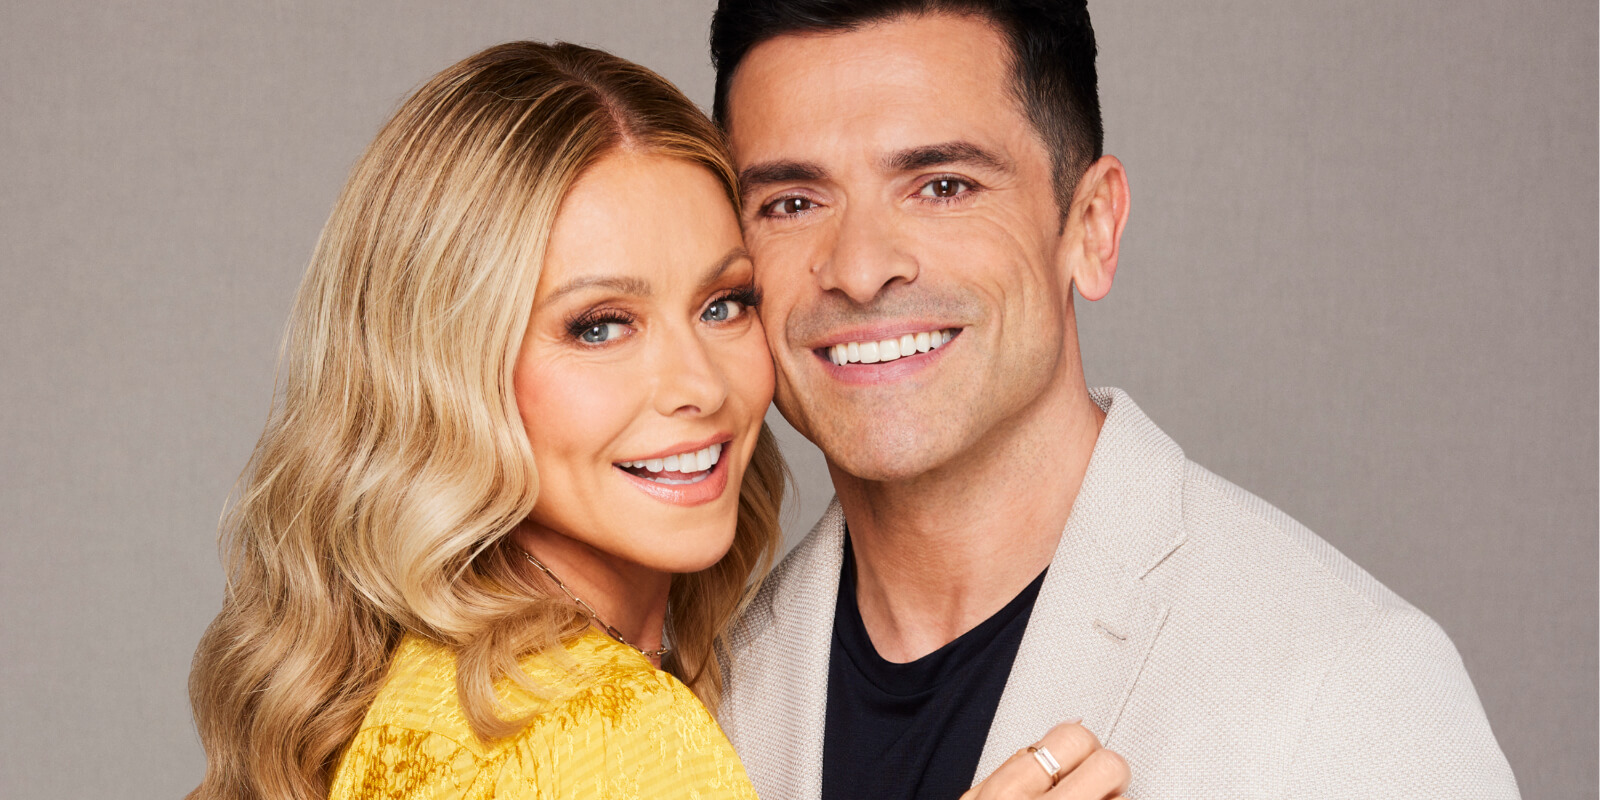 Kelly Ripa and Mark Consuelos are hosts of 'Live with Kelly and Mark' in syndication.